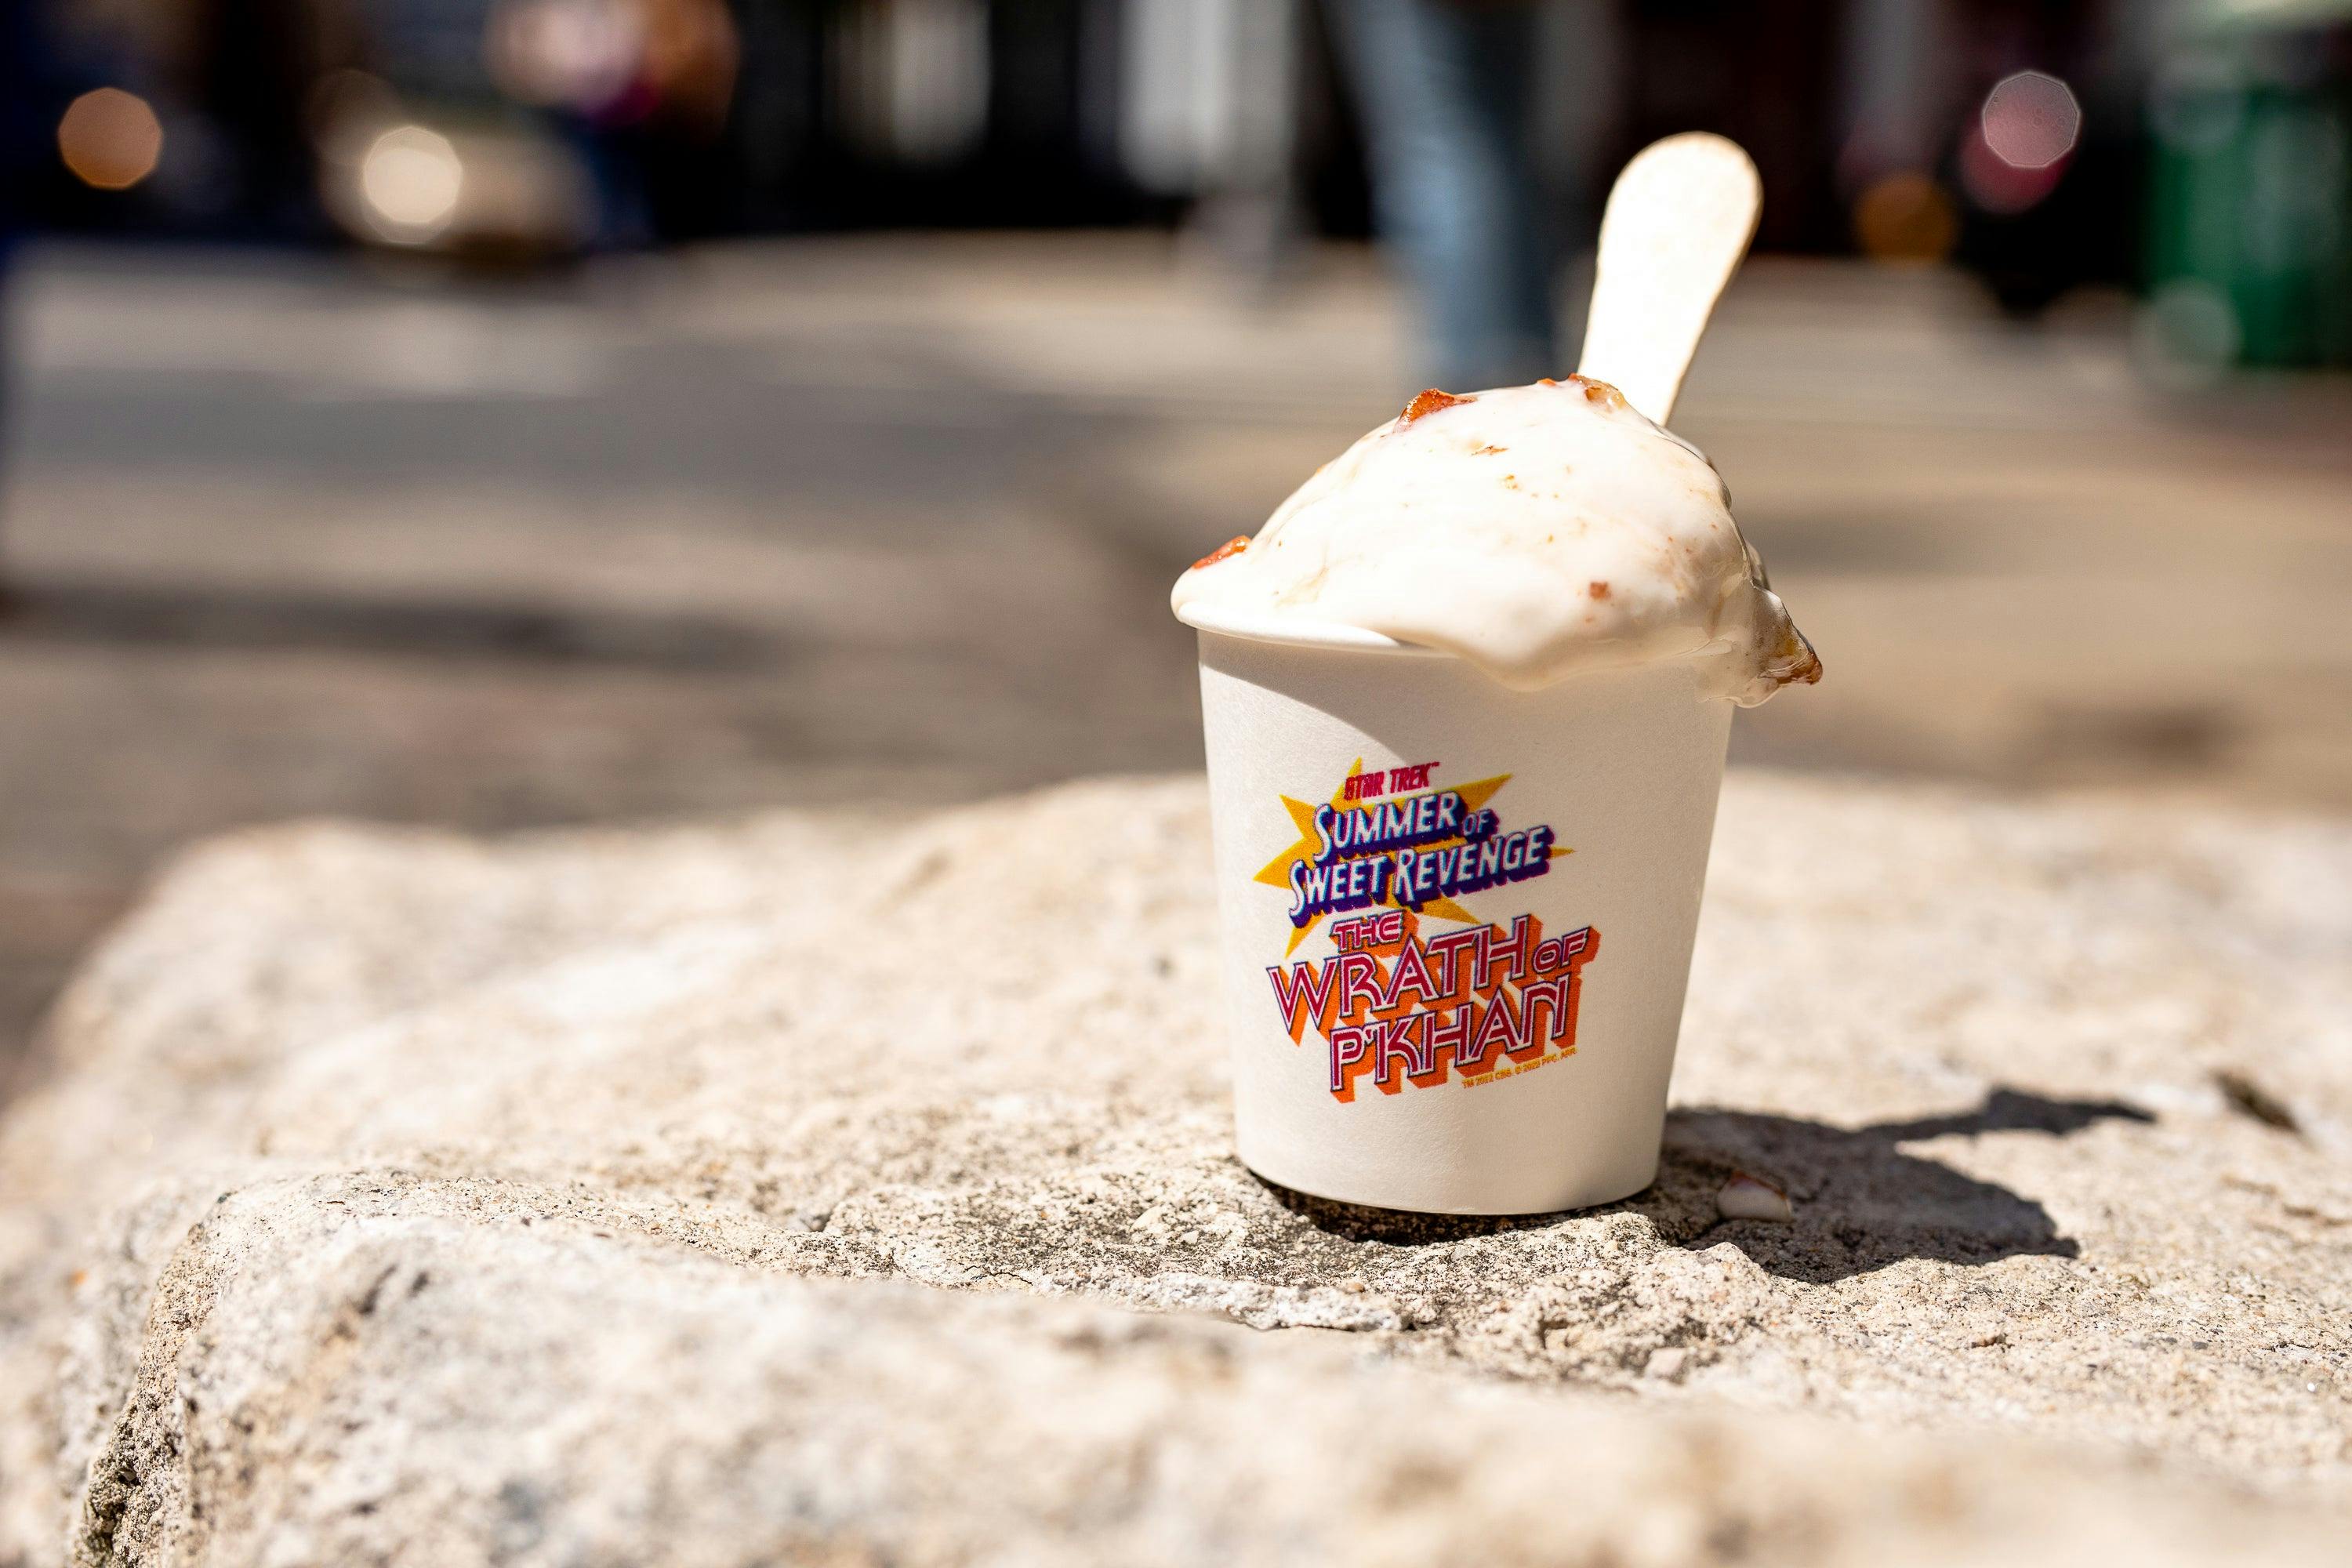 A melting cup of ice cream sits on a ledge. The flavor is the special Wrath of P'Khan flavor.